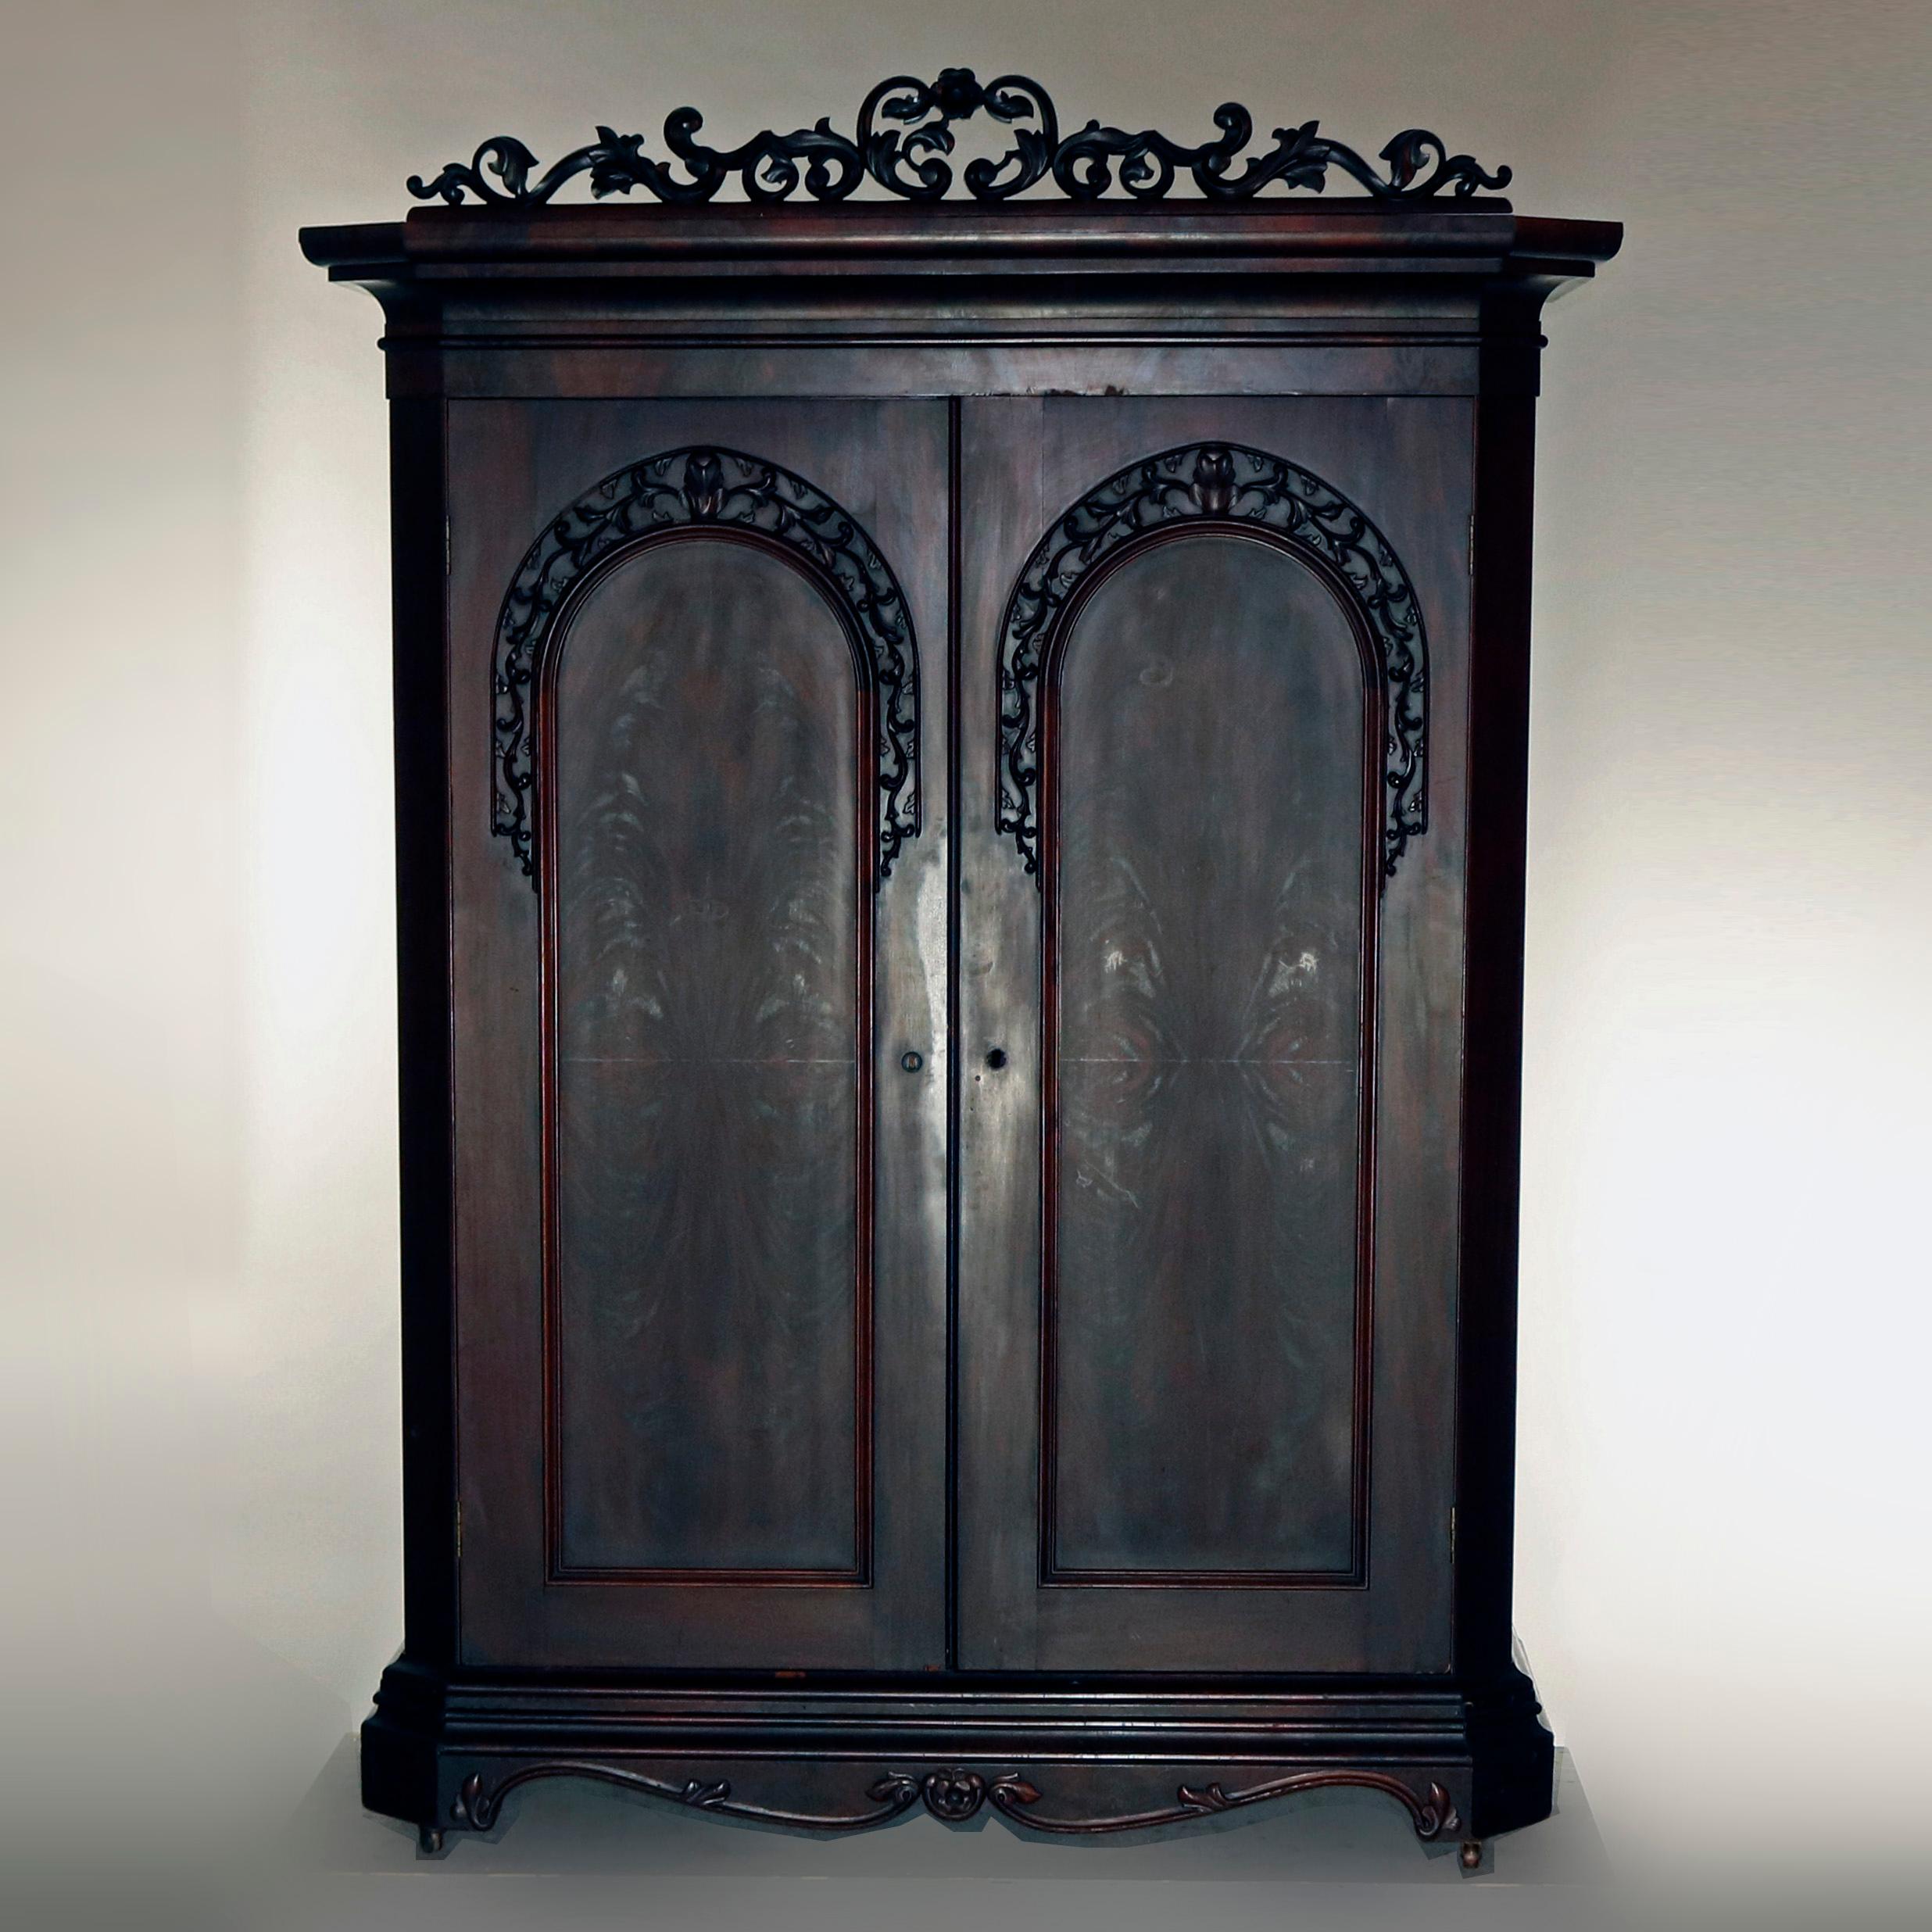 An antique transitional Empire into Victorian wardrobe features flame mahogany construction in Empire form and incorporating elements of Victorian including the carved and pierced scroll and foliate crest, arch panelled double doors with applied